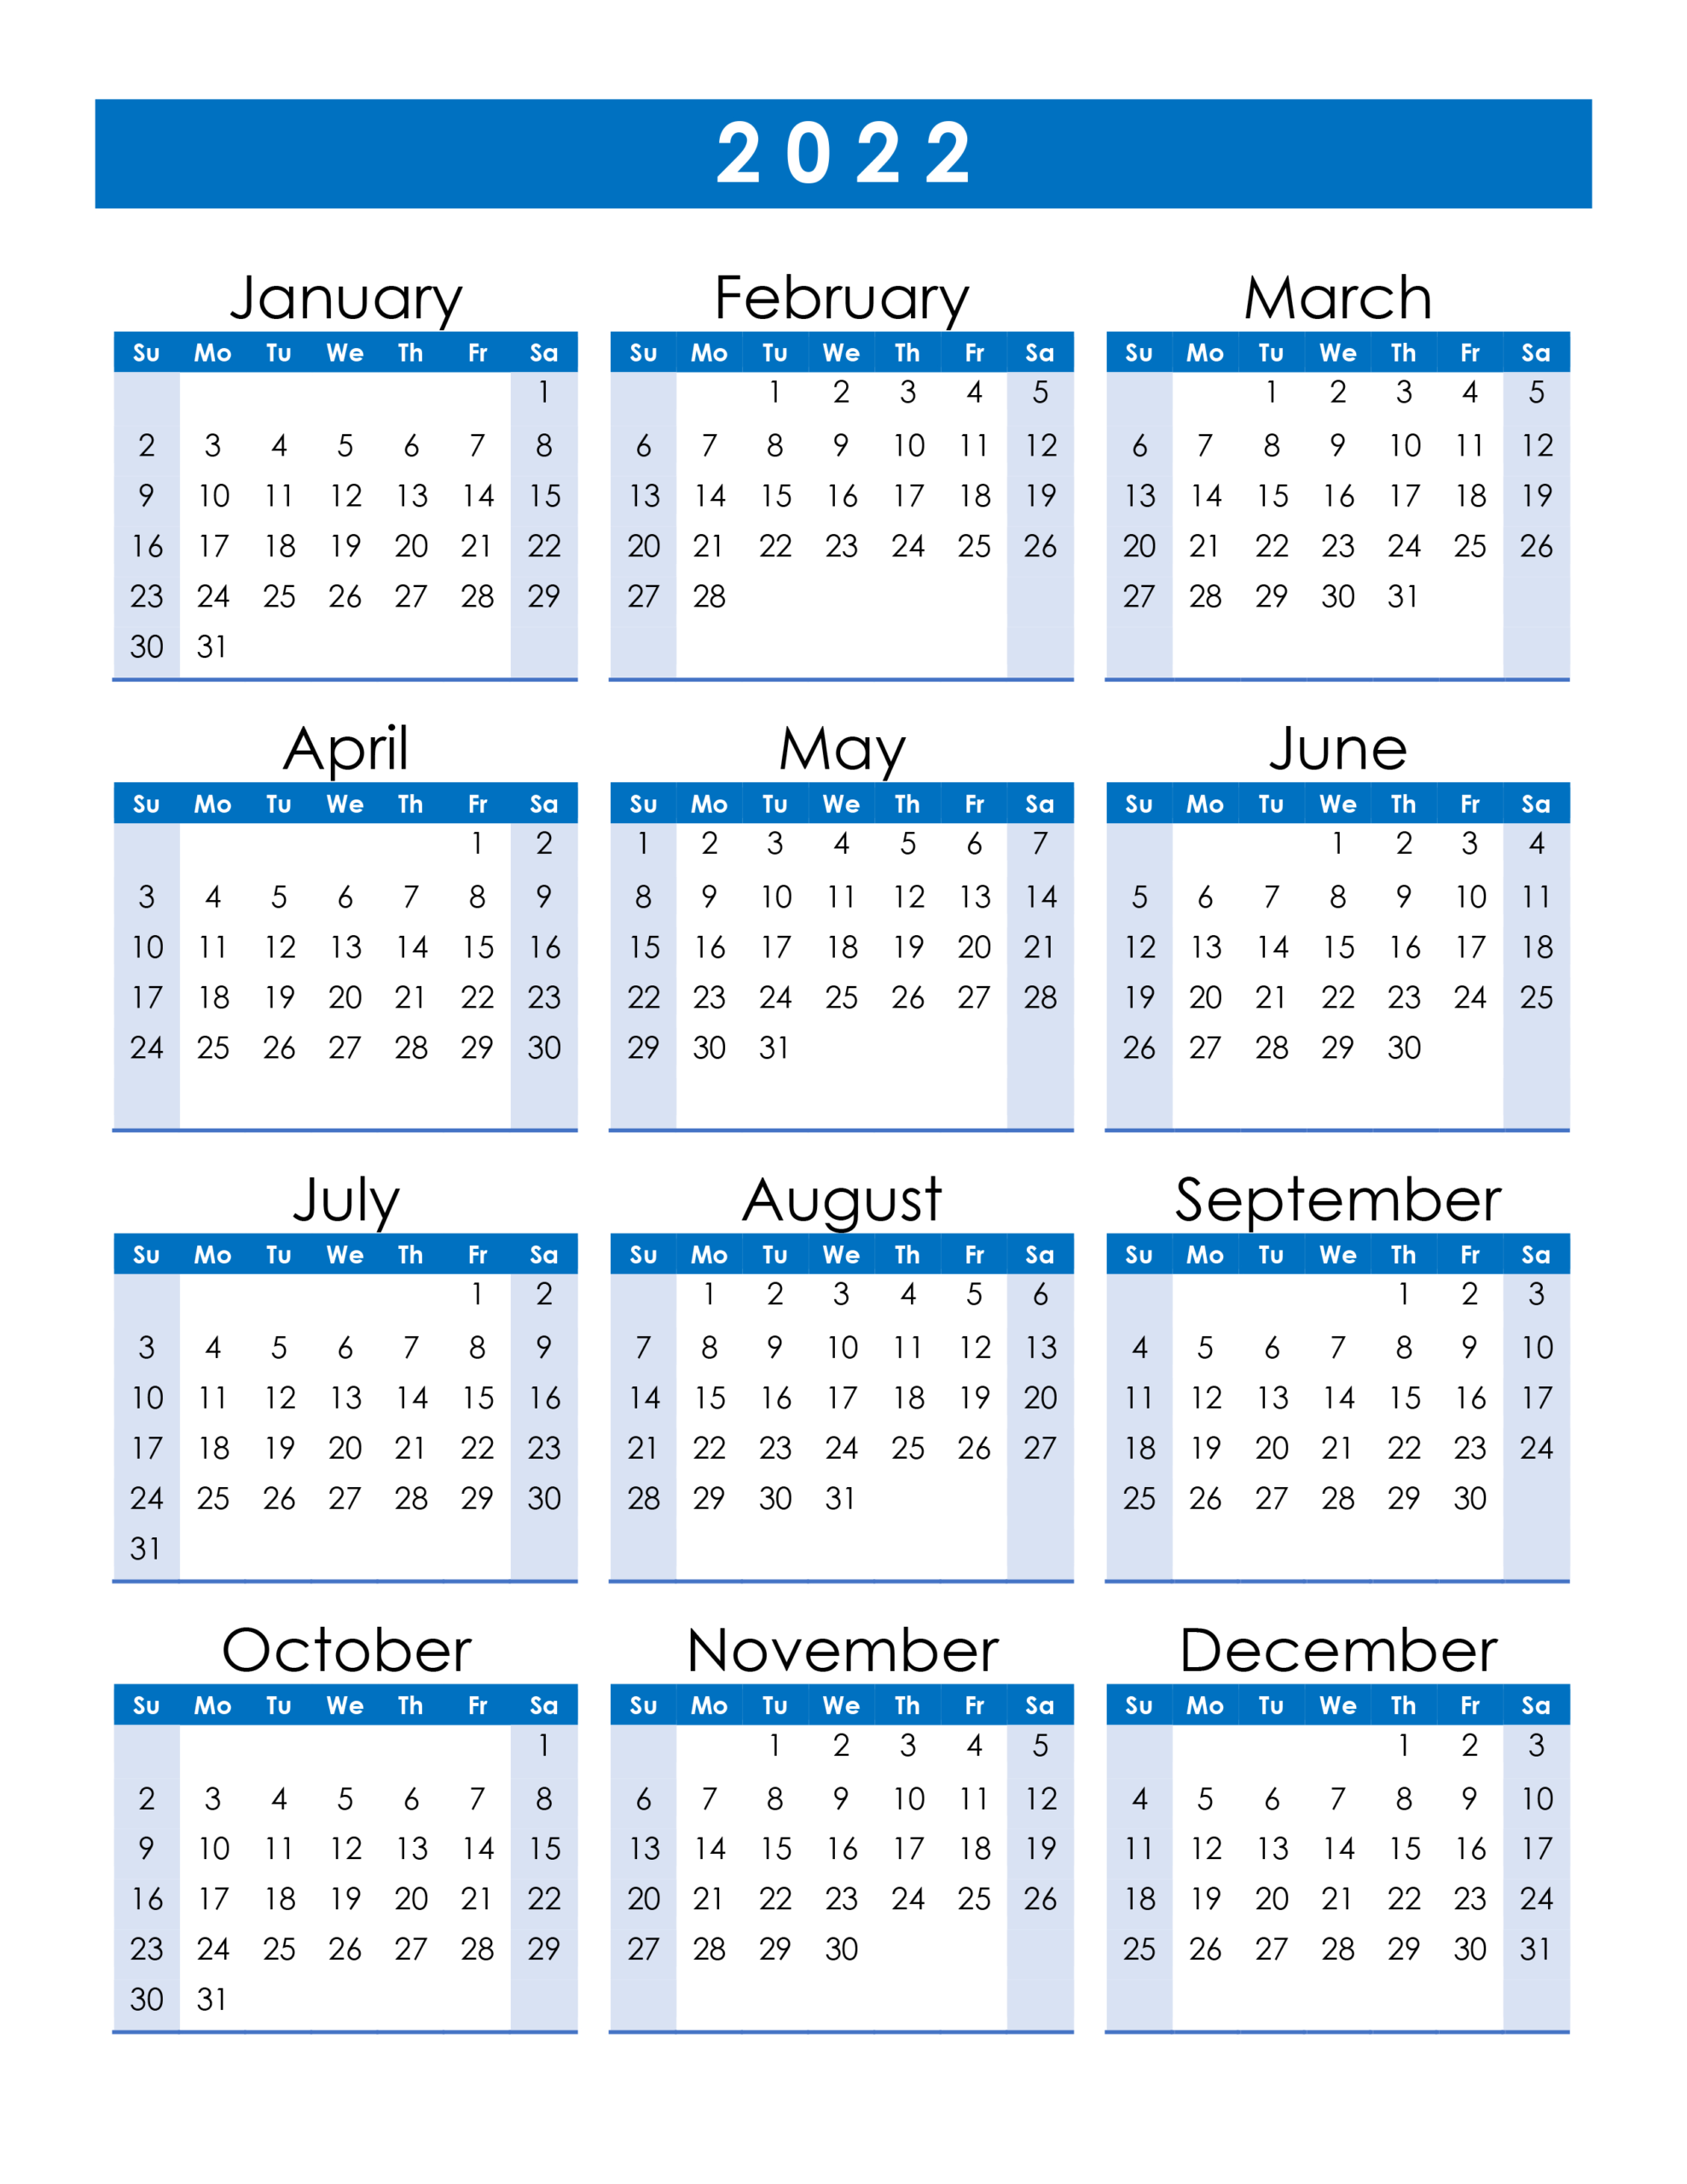 2022 Calendar Printable One Page  2022 Yearly Calendar : The 12 Months throughout Printable 2022 Calendar One Page